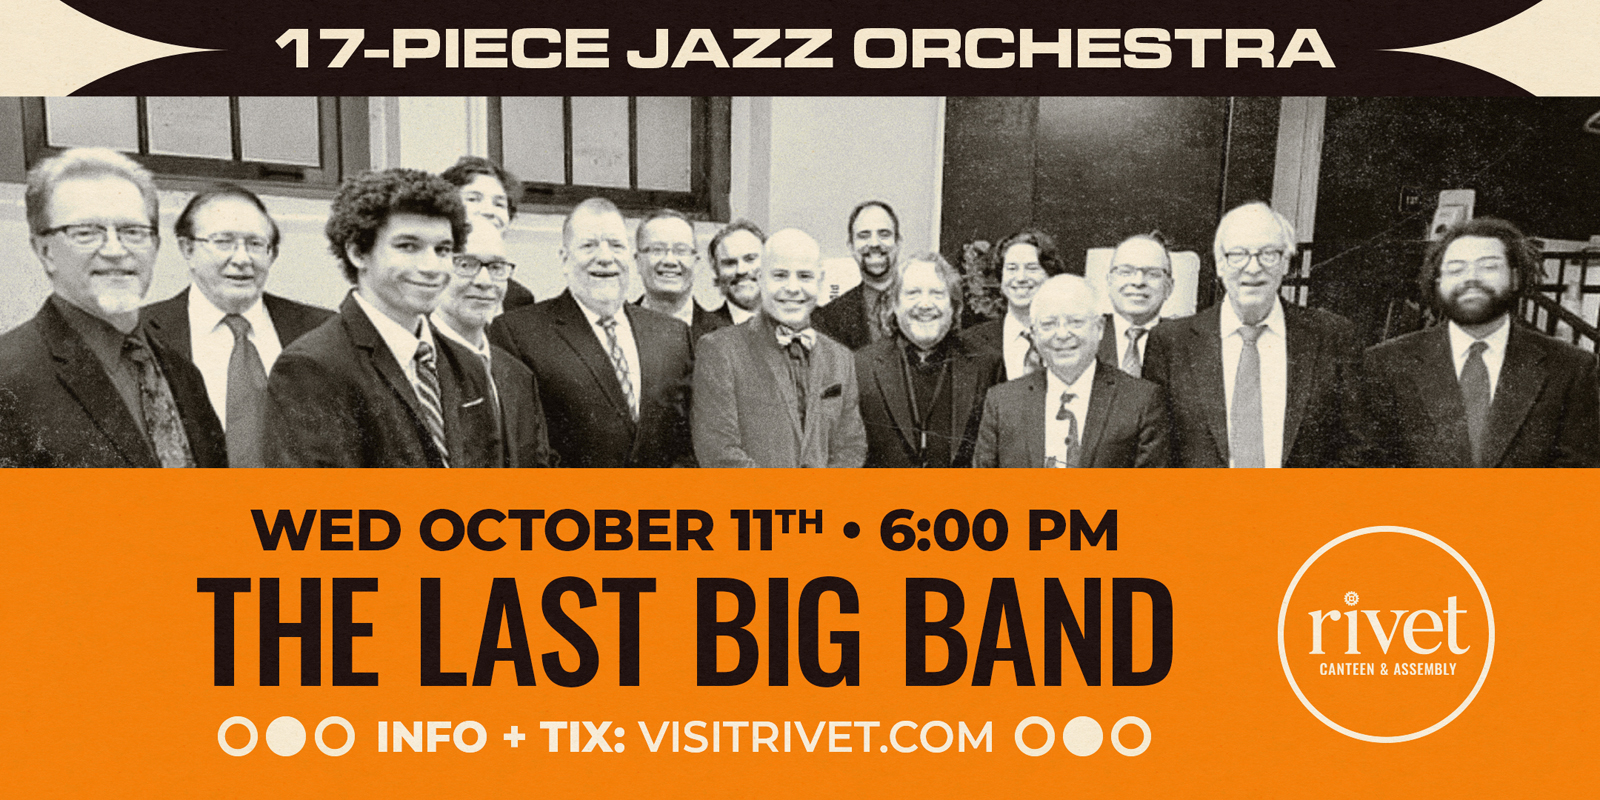 The Last Big Band will be performing live at Rivet: Canteen & Assembly on Wednesday, October 11th, 2023. Get your tickets now!